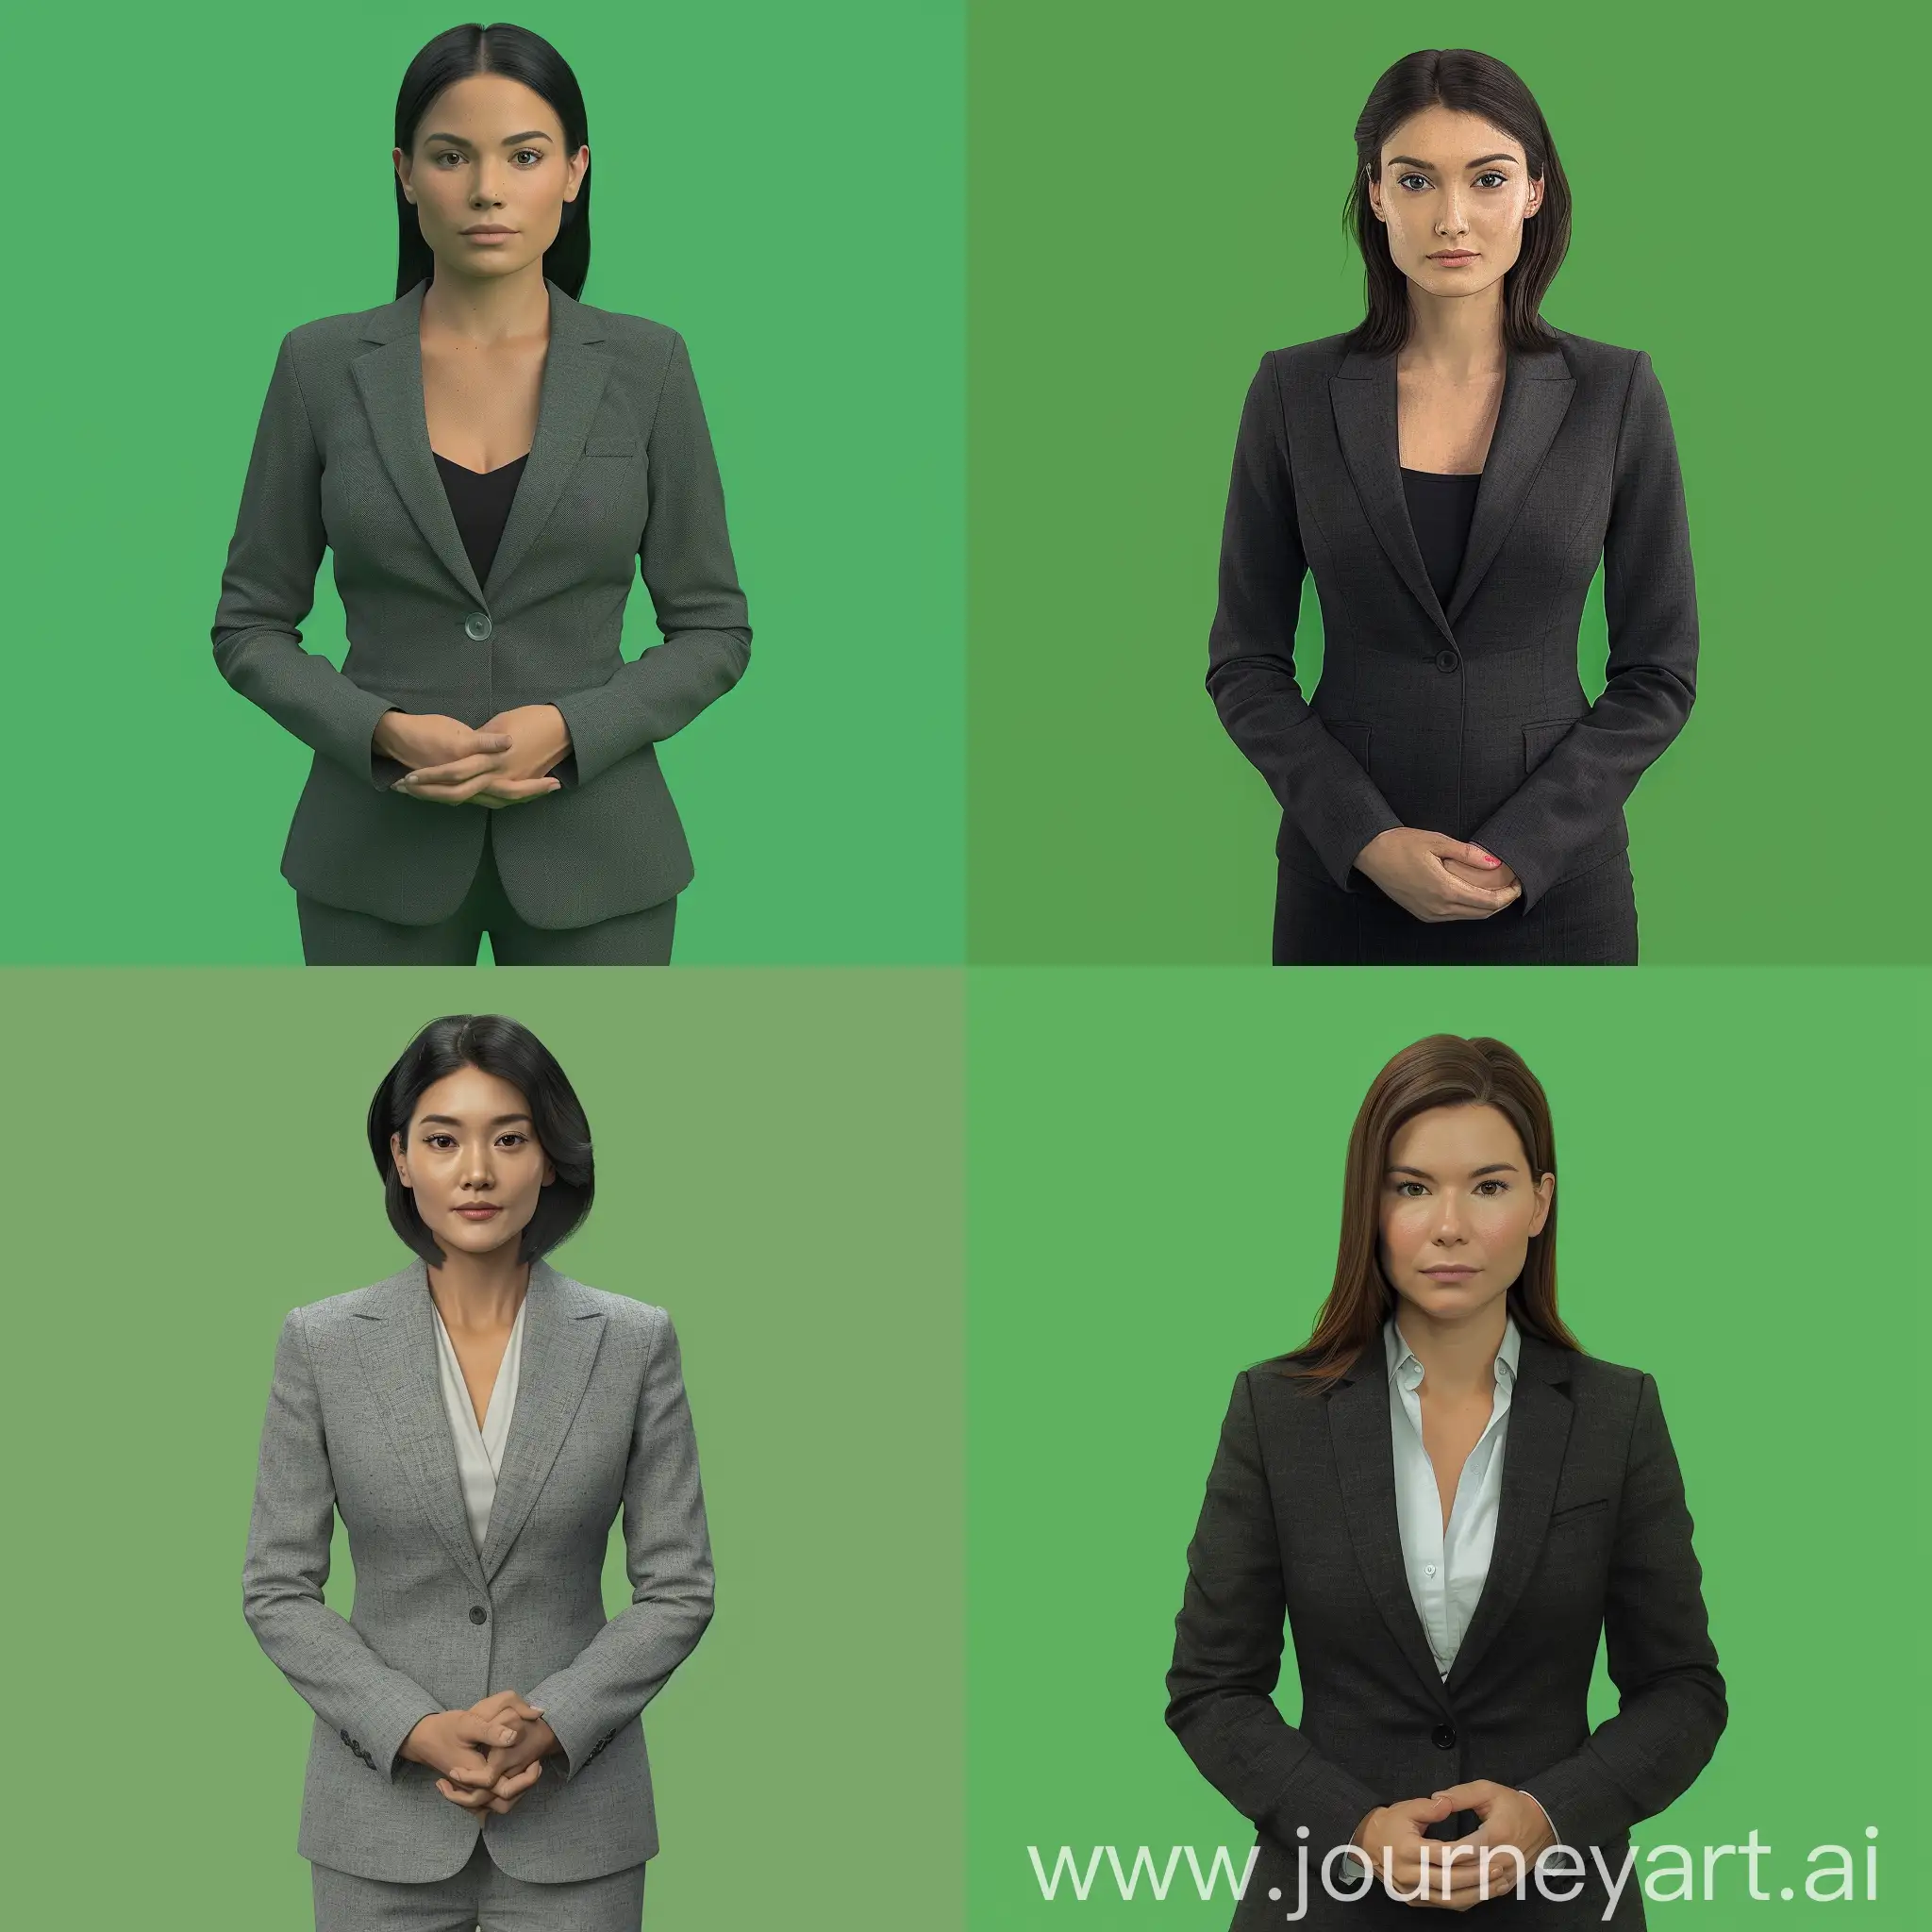 Formal-Female-News-Presenter-Standing-for-Broadcast-in-Solid-Chroma-Green-Background